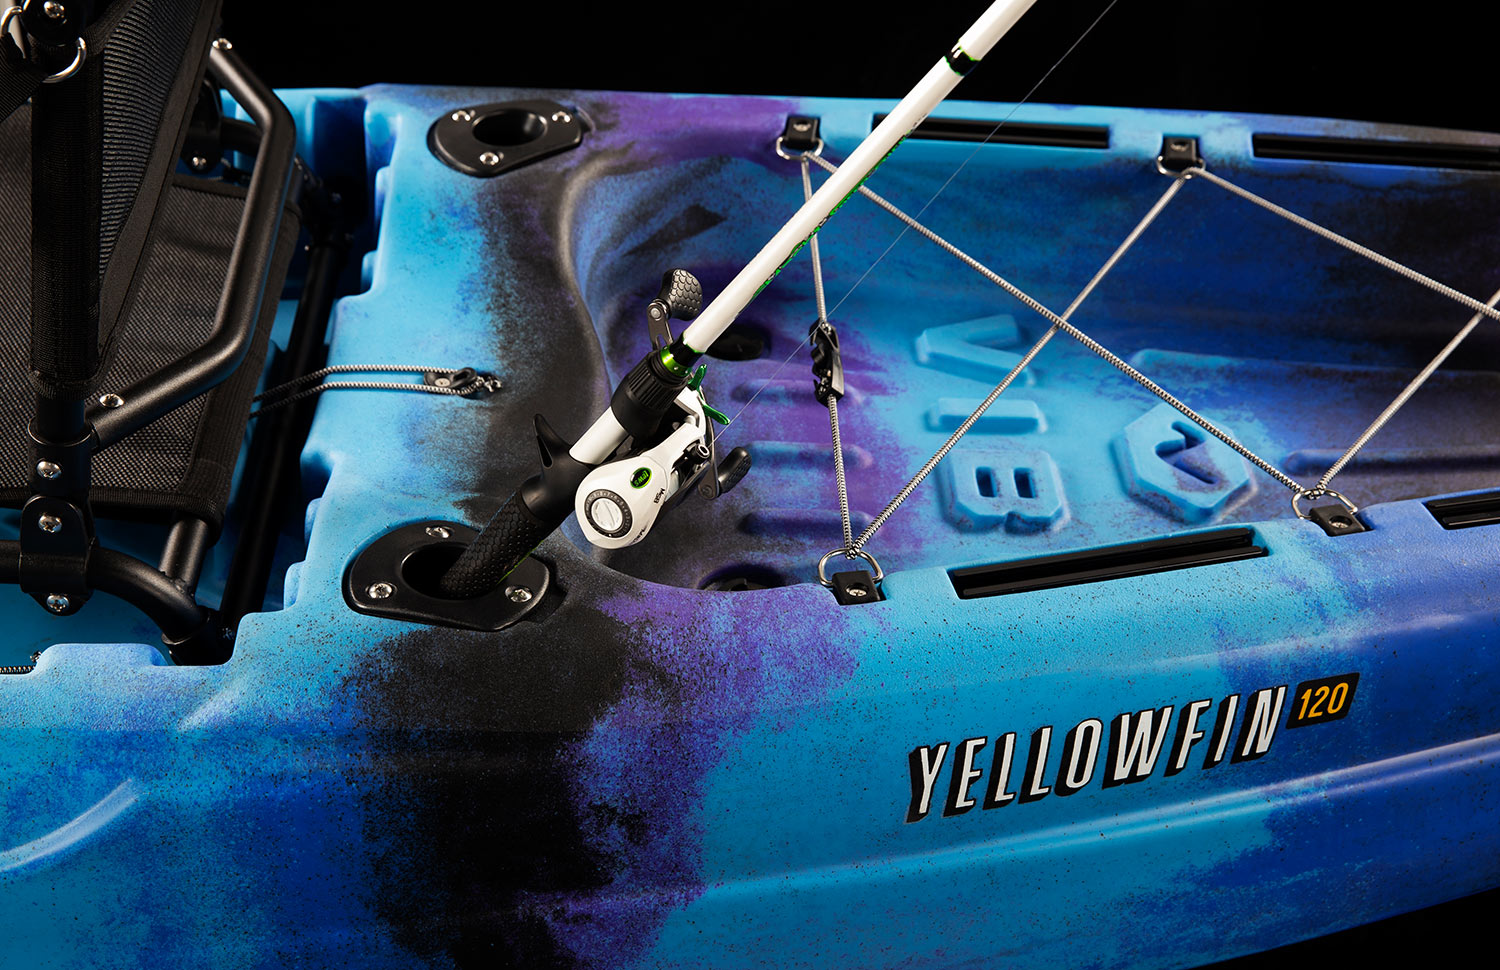 Yellowfin 120 rear storage well with bungee tie down